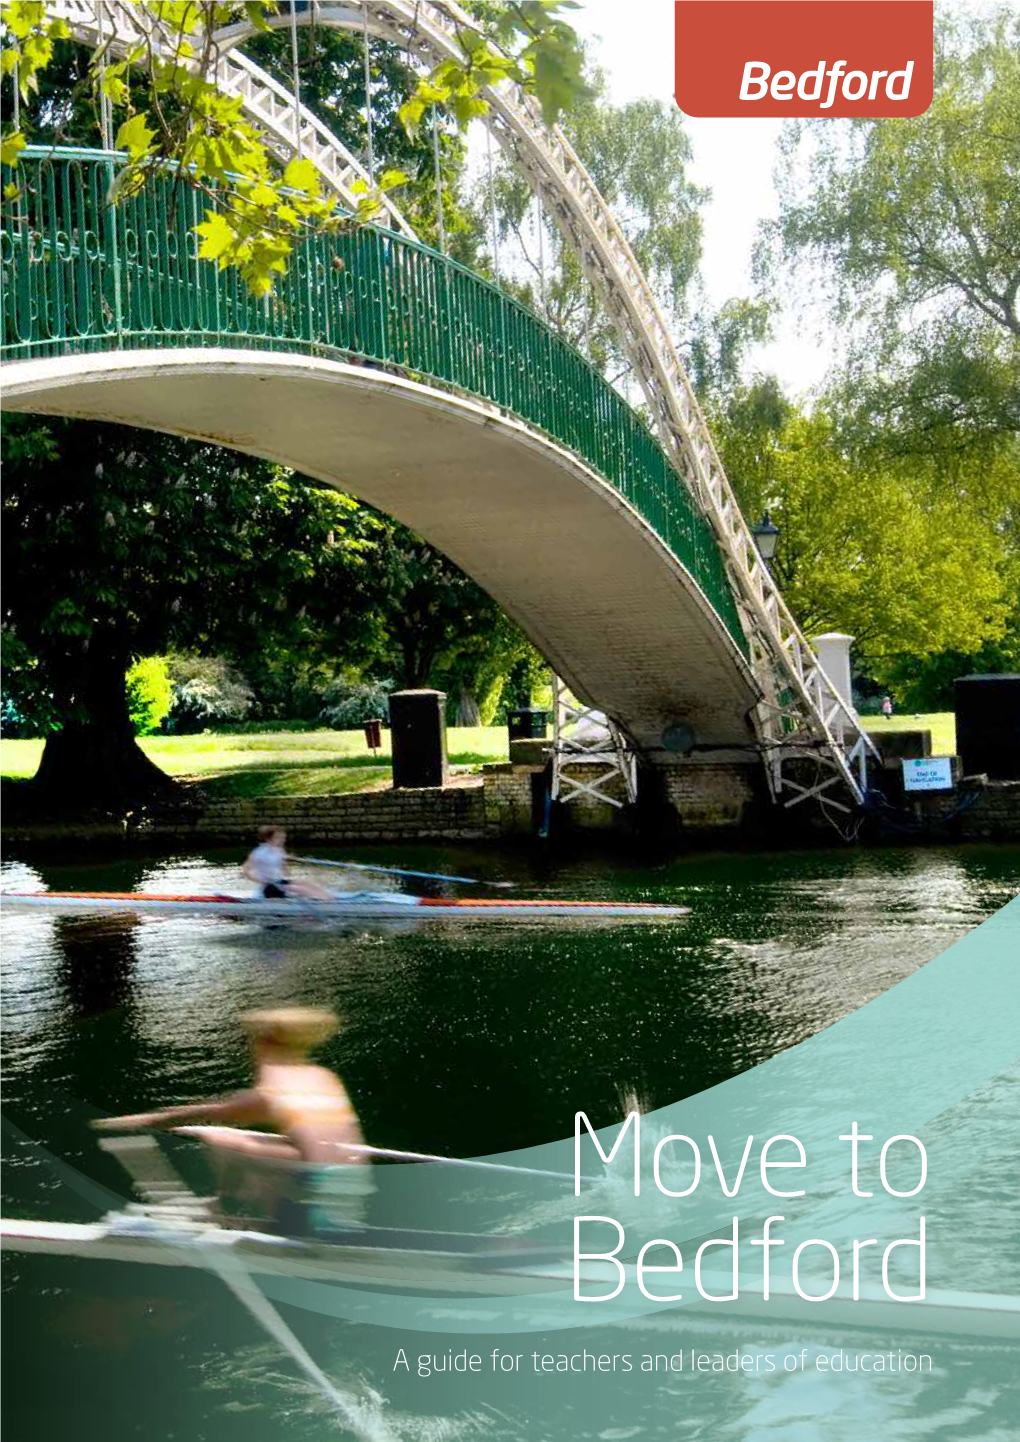 Move to Bedford a Guide for Teachers and Leaders of Education